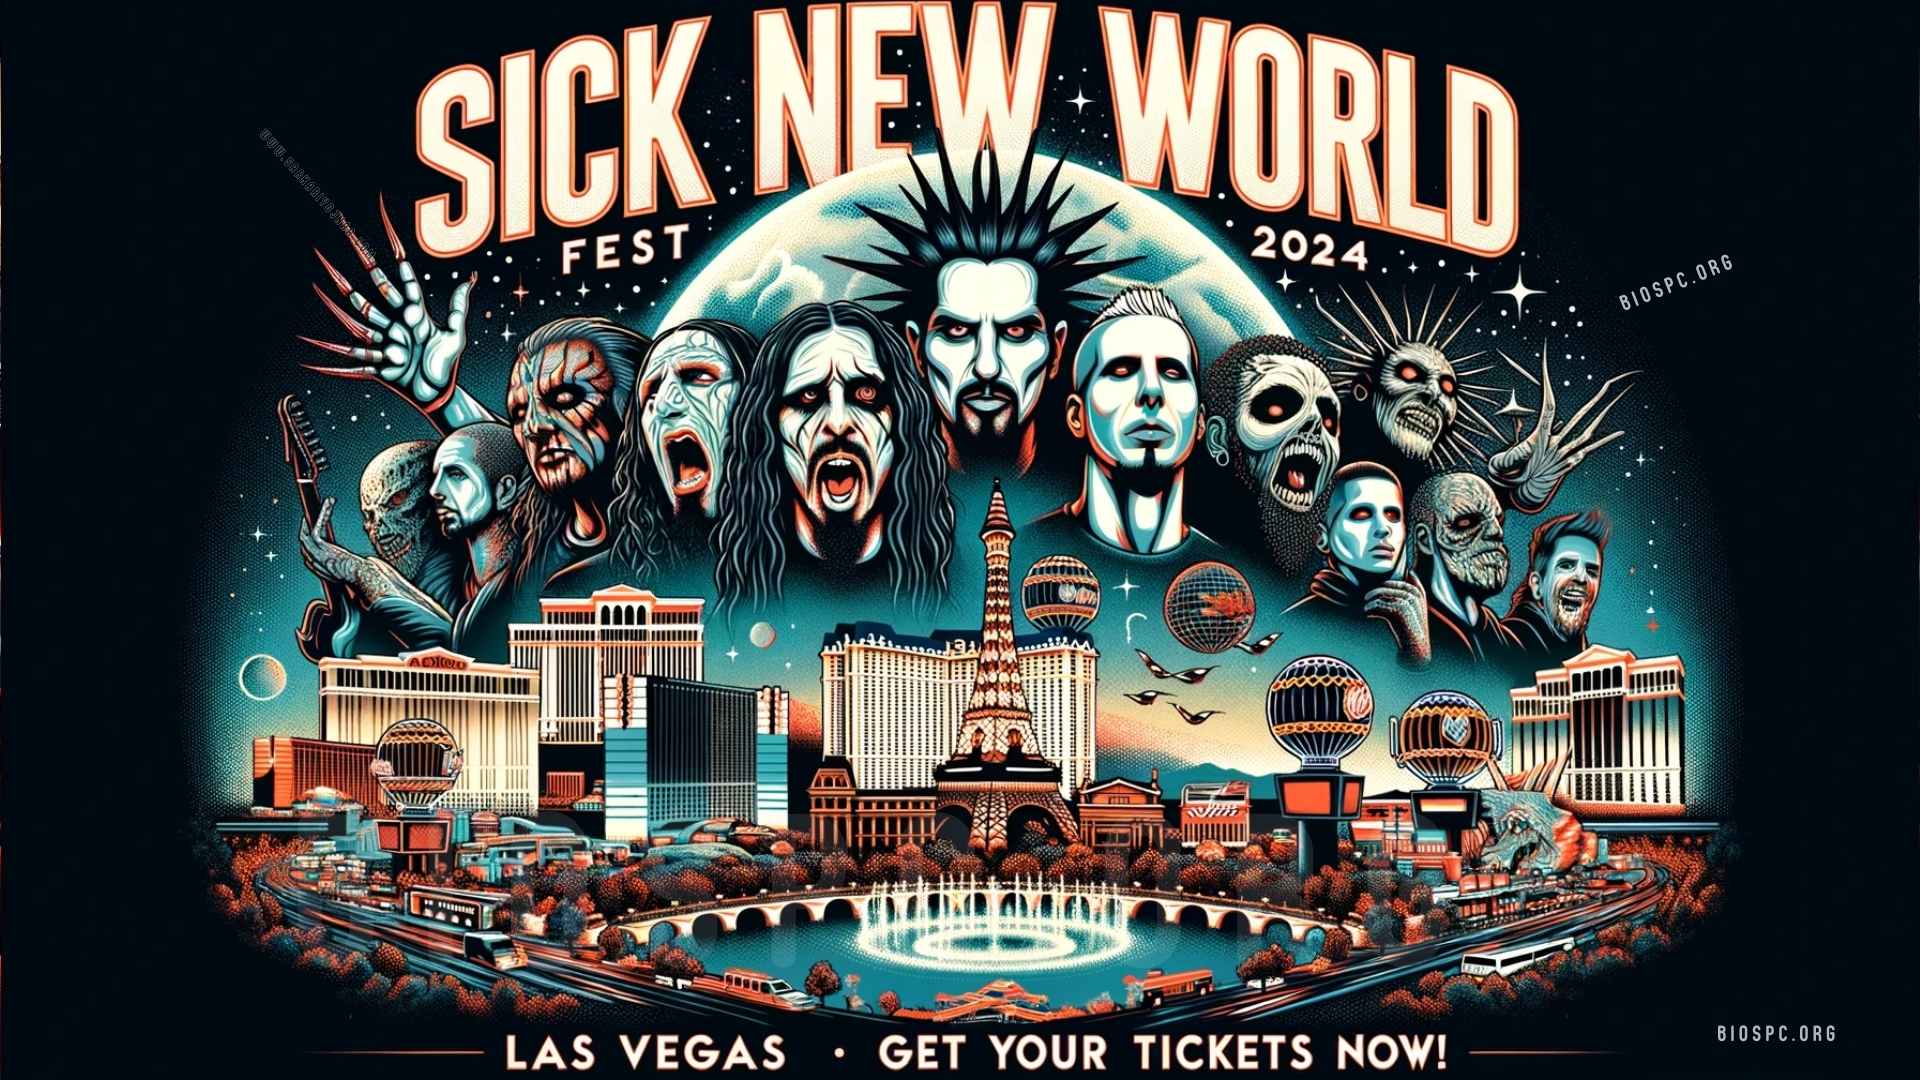 Sick New World 2024 Lineup System of a Down, Slipknot know...